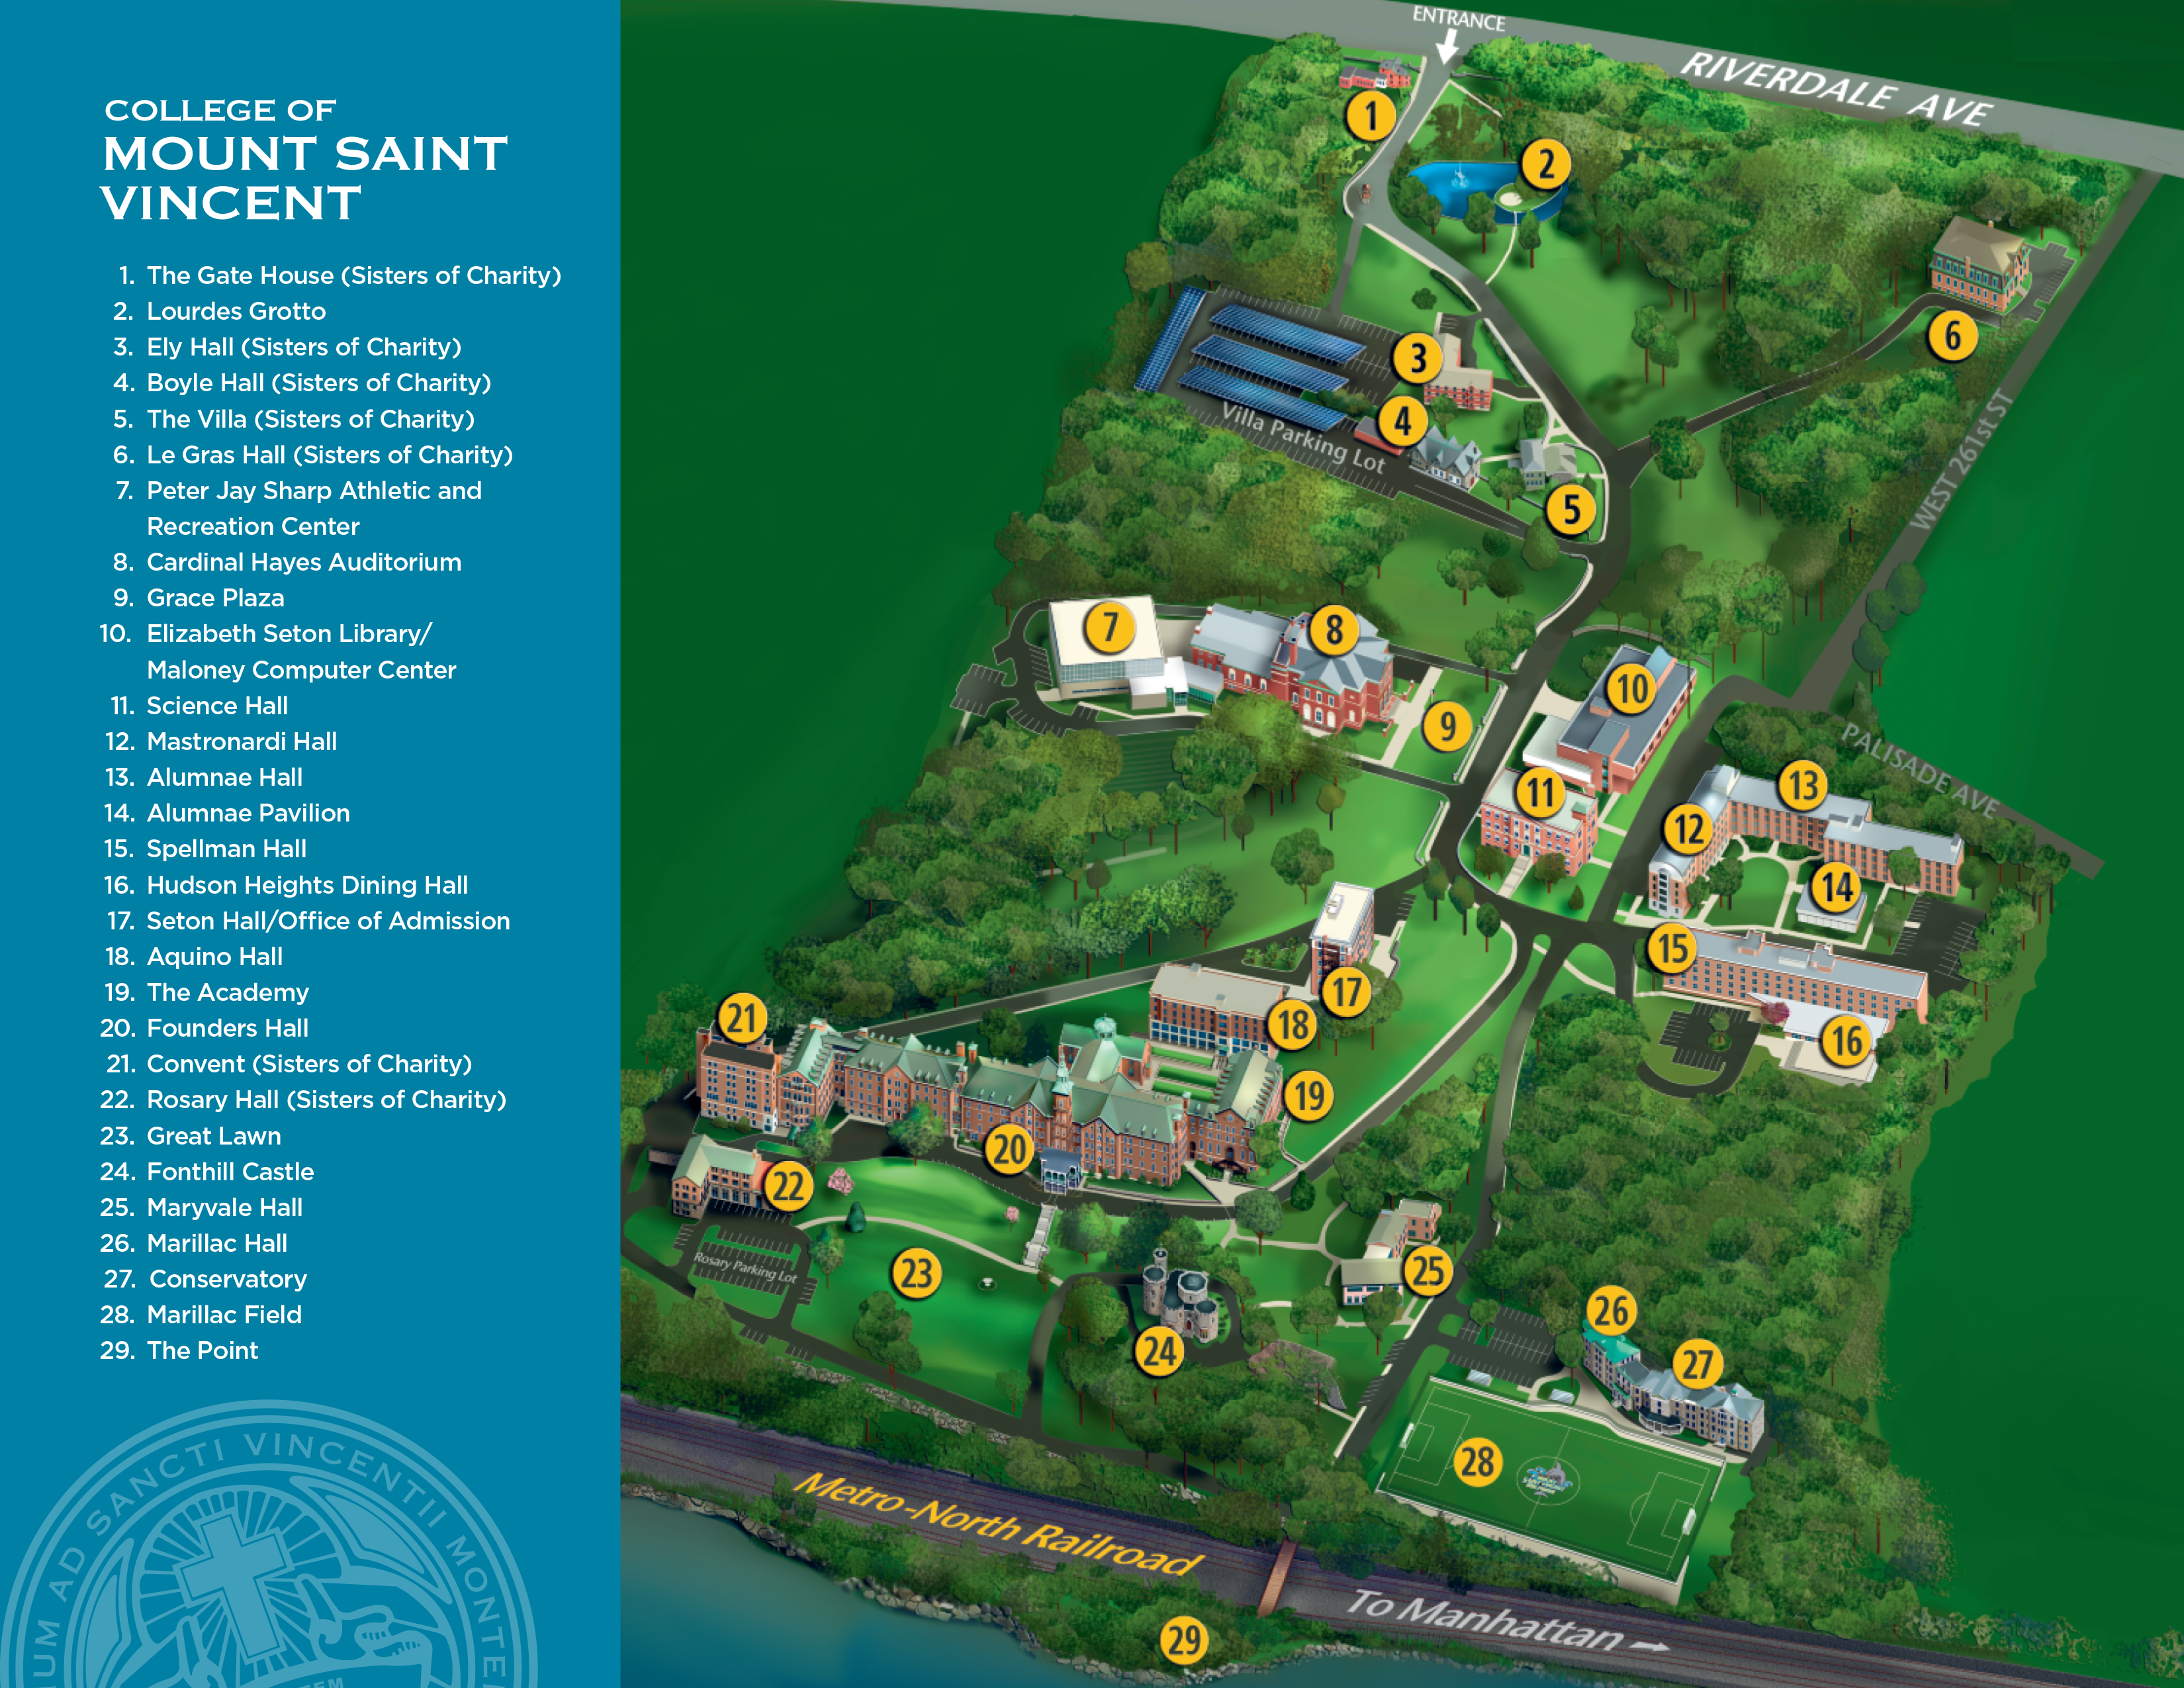 Map of the College of Mount Saint Vincent's Riverdale campus